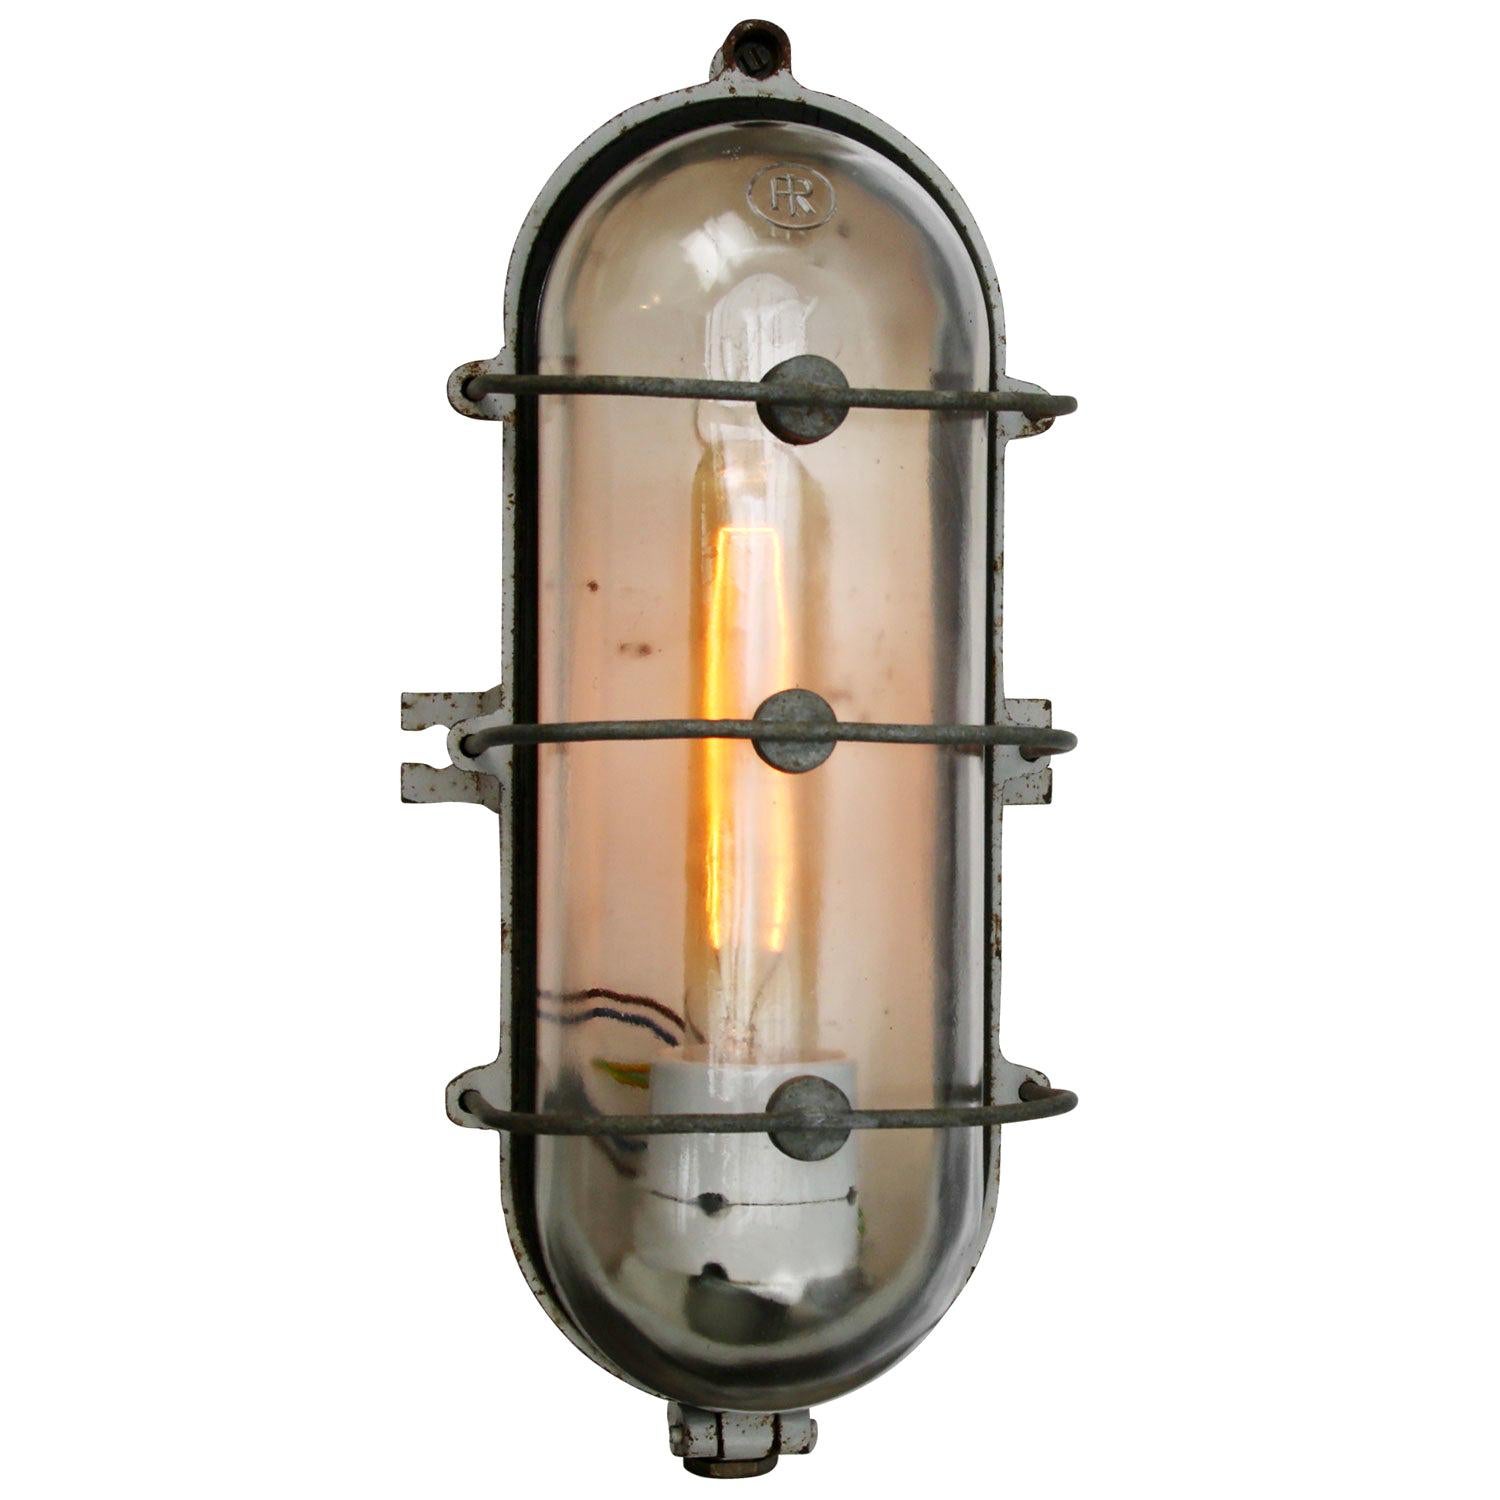 Cast Iron Vintage Industrial Clear Glass Wall Lamp Scones